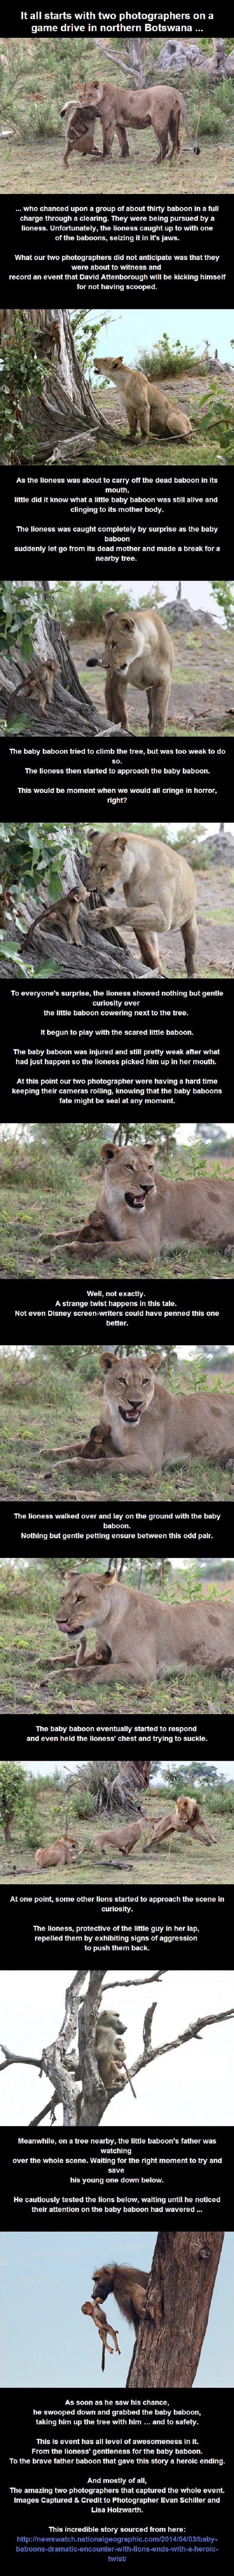 Lioness killed a baboon